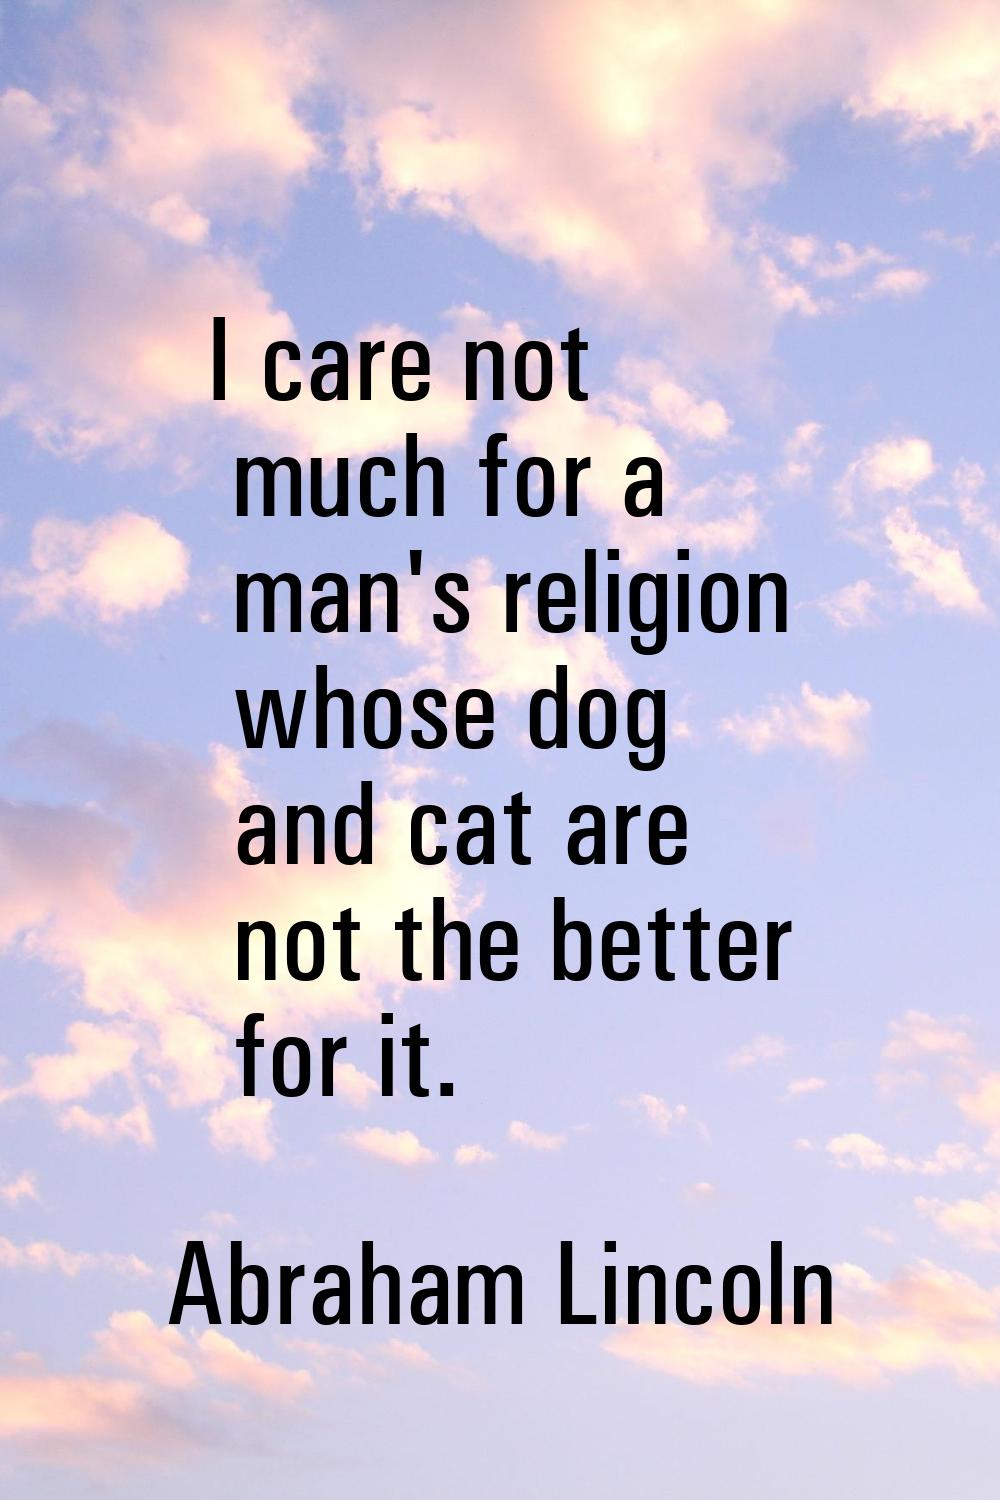 I care not much for a man's religion whose dog and cat are not the better for it.